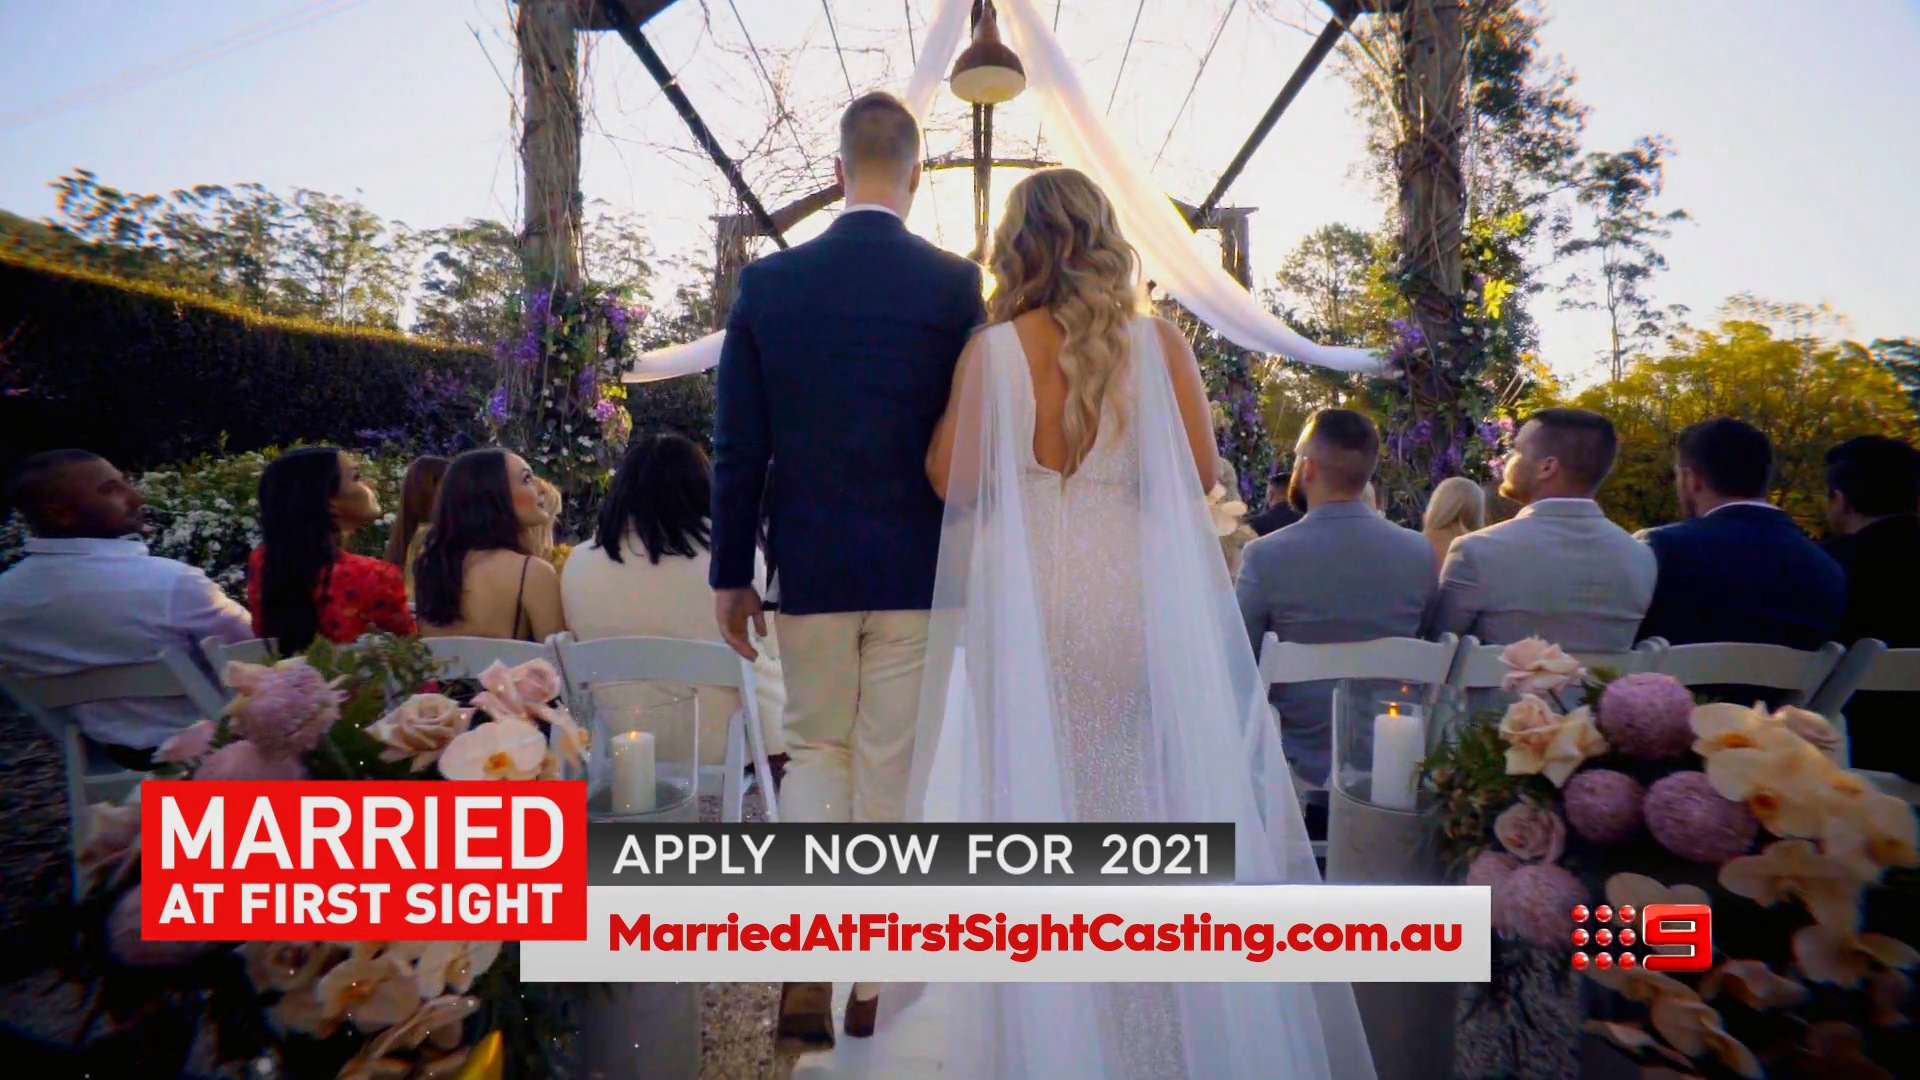 Apply for Married At First Sight 2021